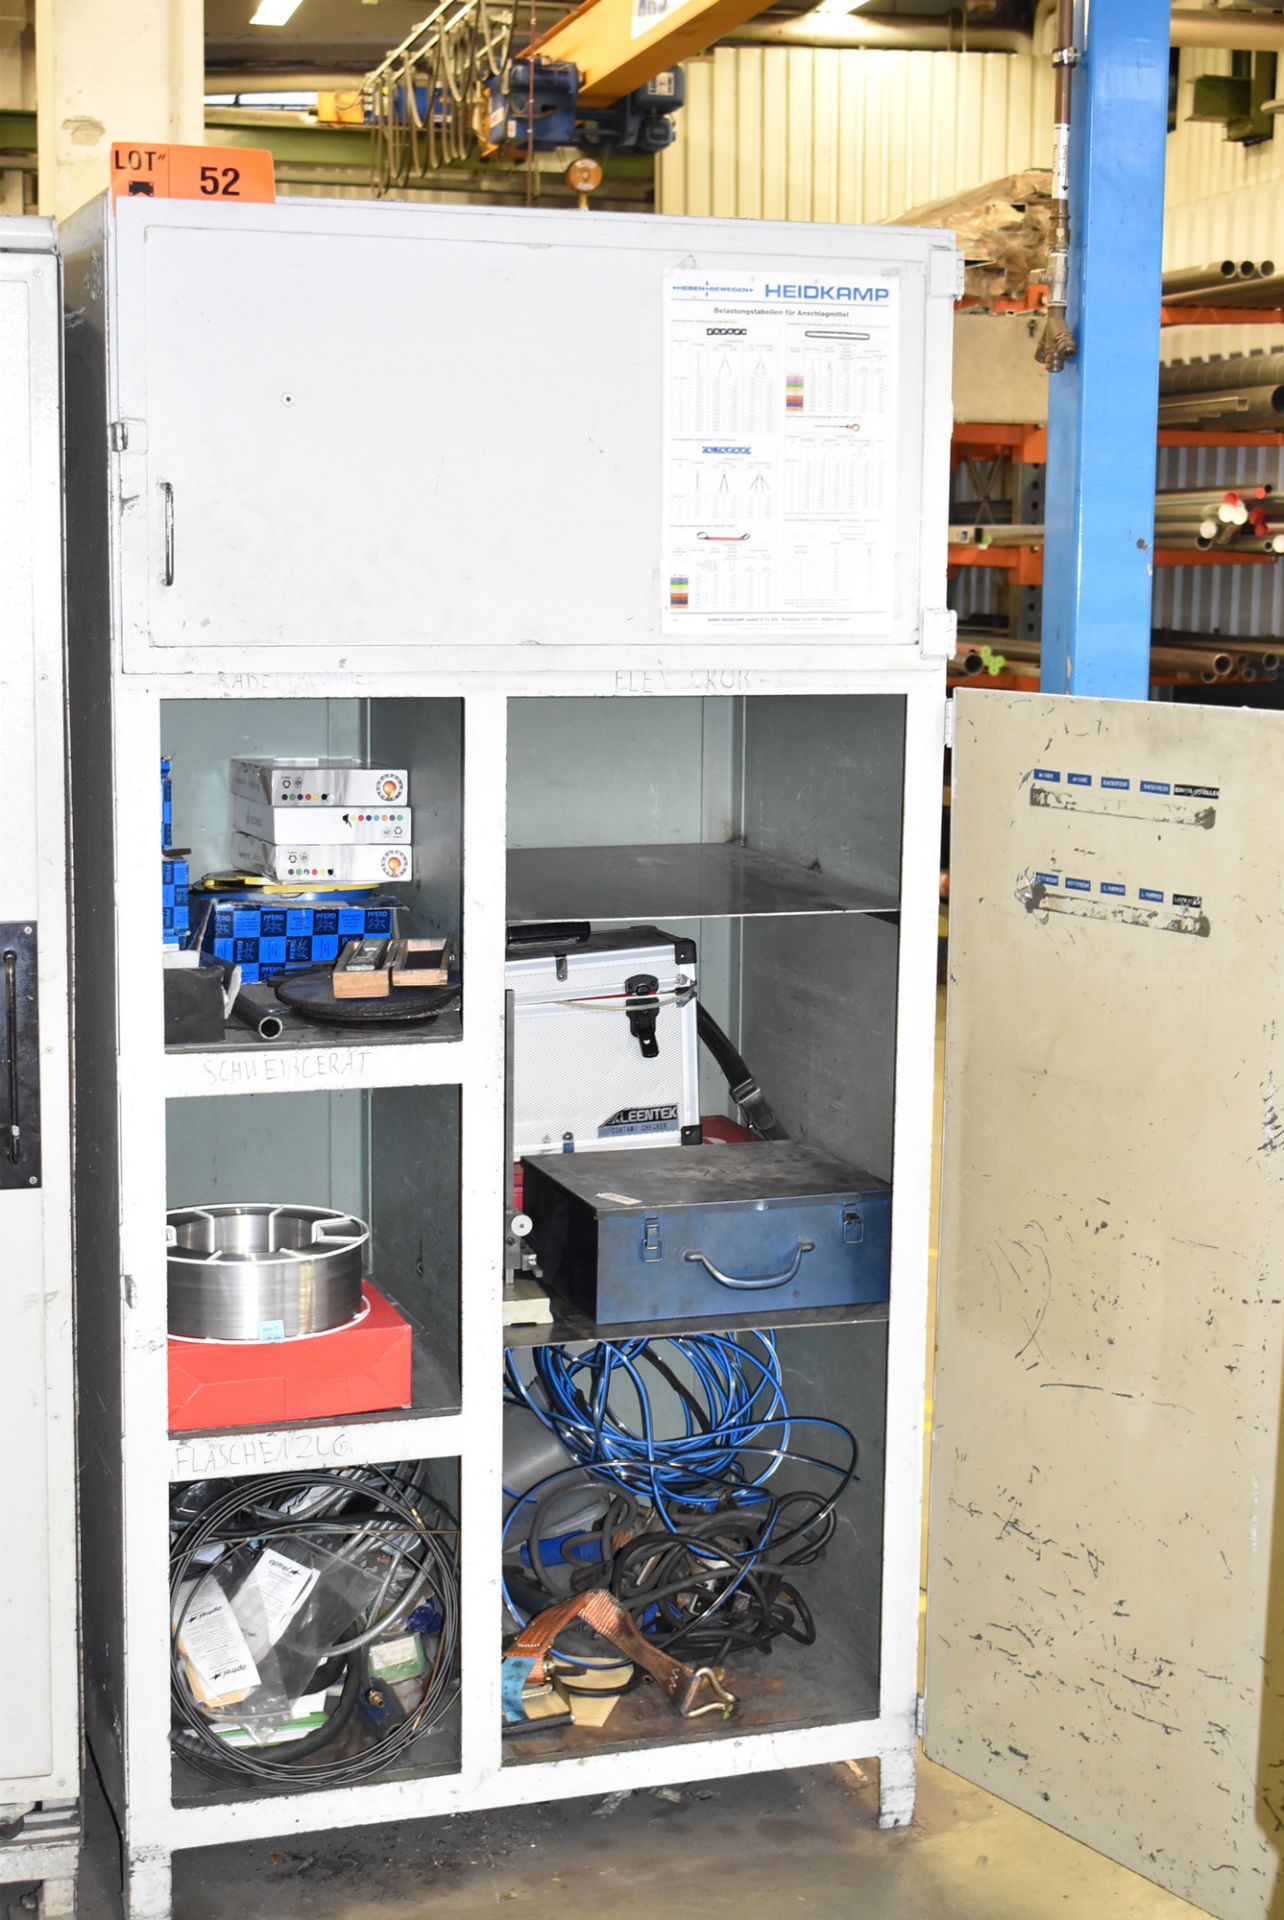 LOT/ METAL CABINET WITH WELDING AND GRINDING SUPPLIES (BAU 9) [Removal Fee = € 27.50 + applicable